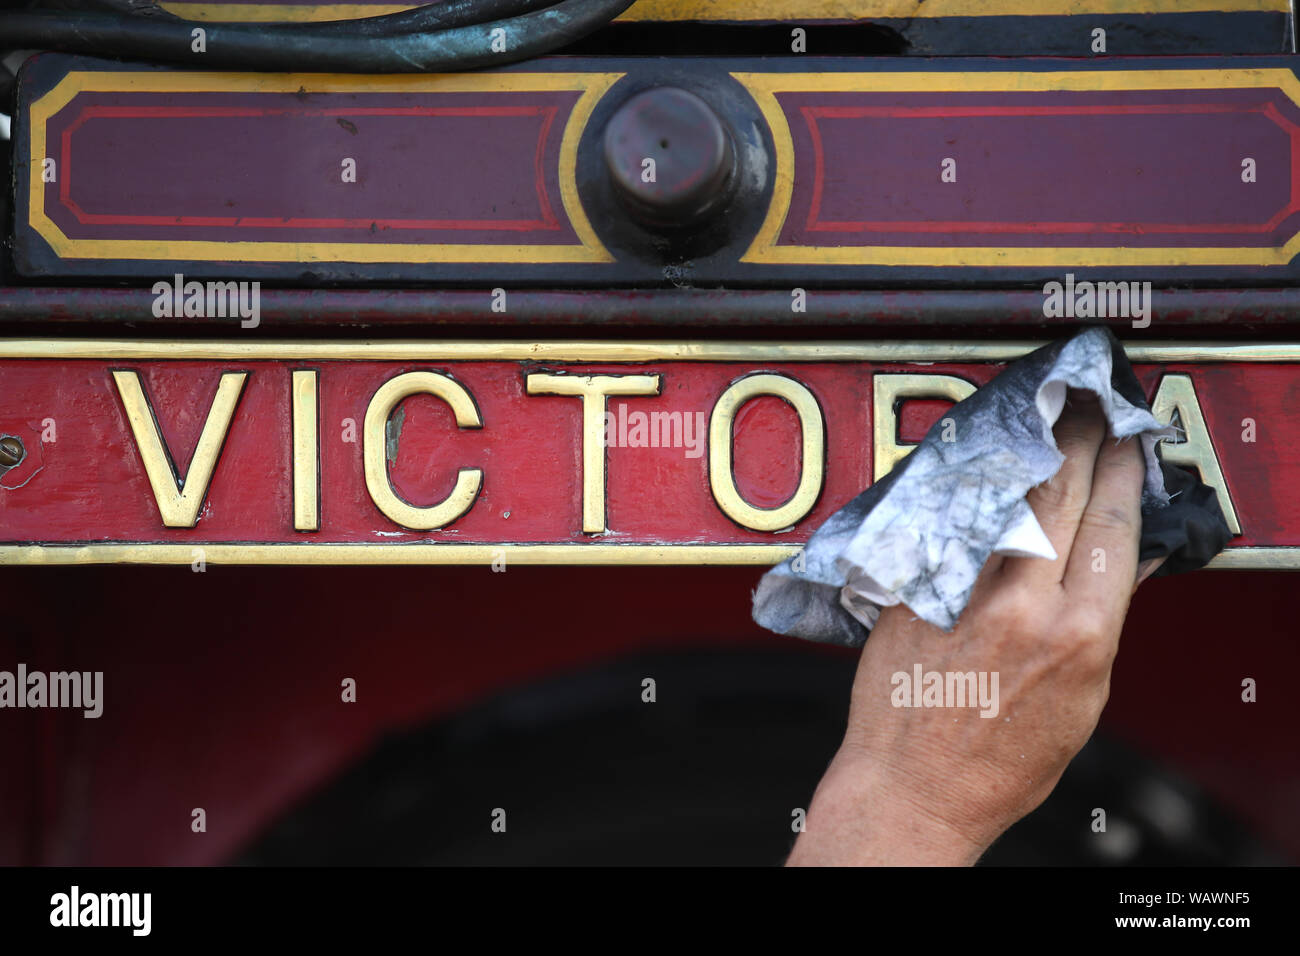 A locomotive sign is cleaned during day one of the 2019 Great Dorset Steam Fair. The fair is a gathering of hundreds of period steam traction engines and heavy mechanical equipment from all eras come to showcase Great Britain's rich industrial, agricultural and leisure history, at the annual show taking place over the August Bank Holiday weekend from Thursday 22nd to Monday 26th August. Stock Photo